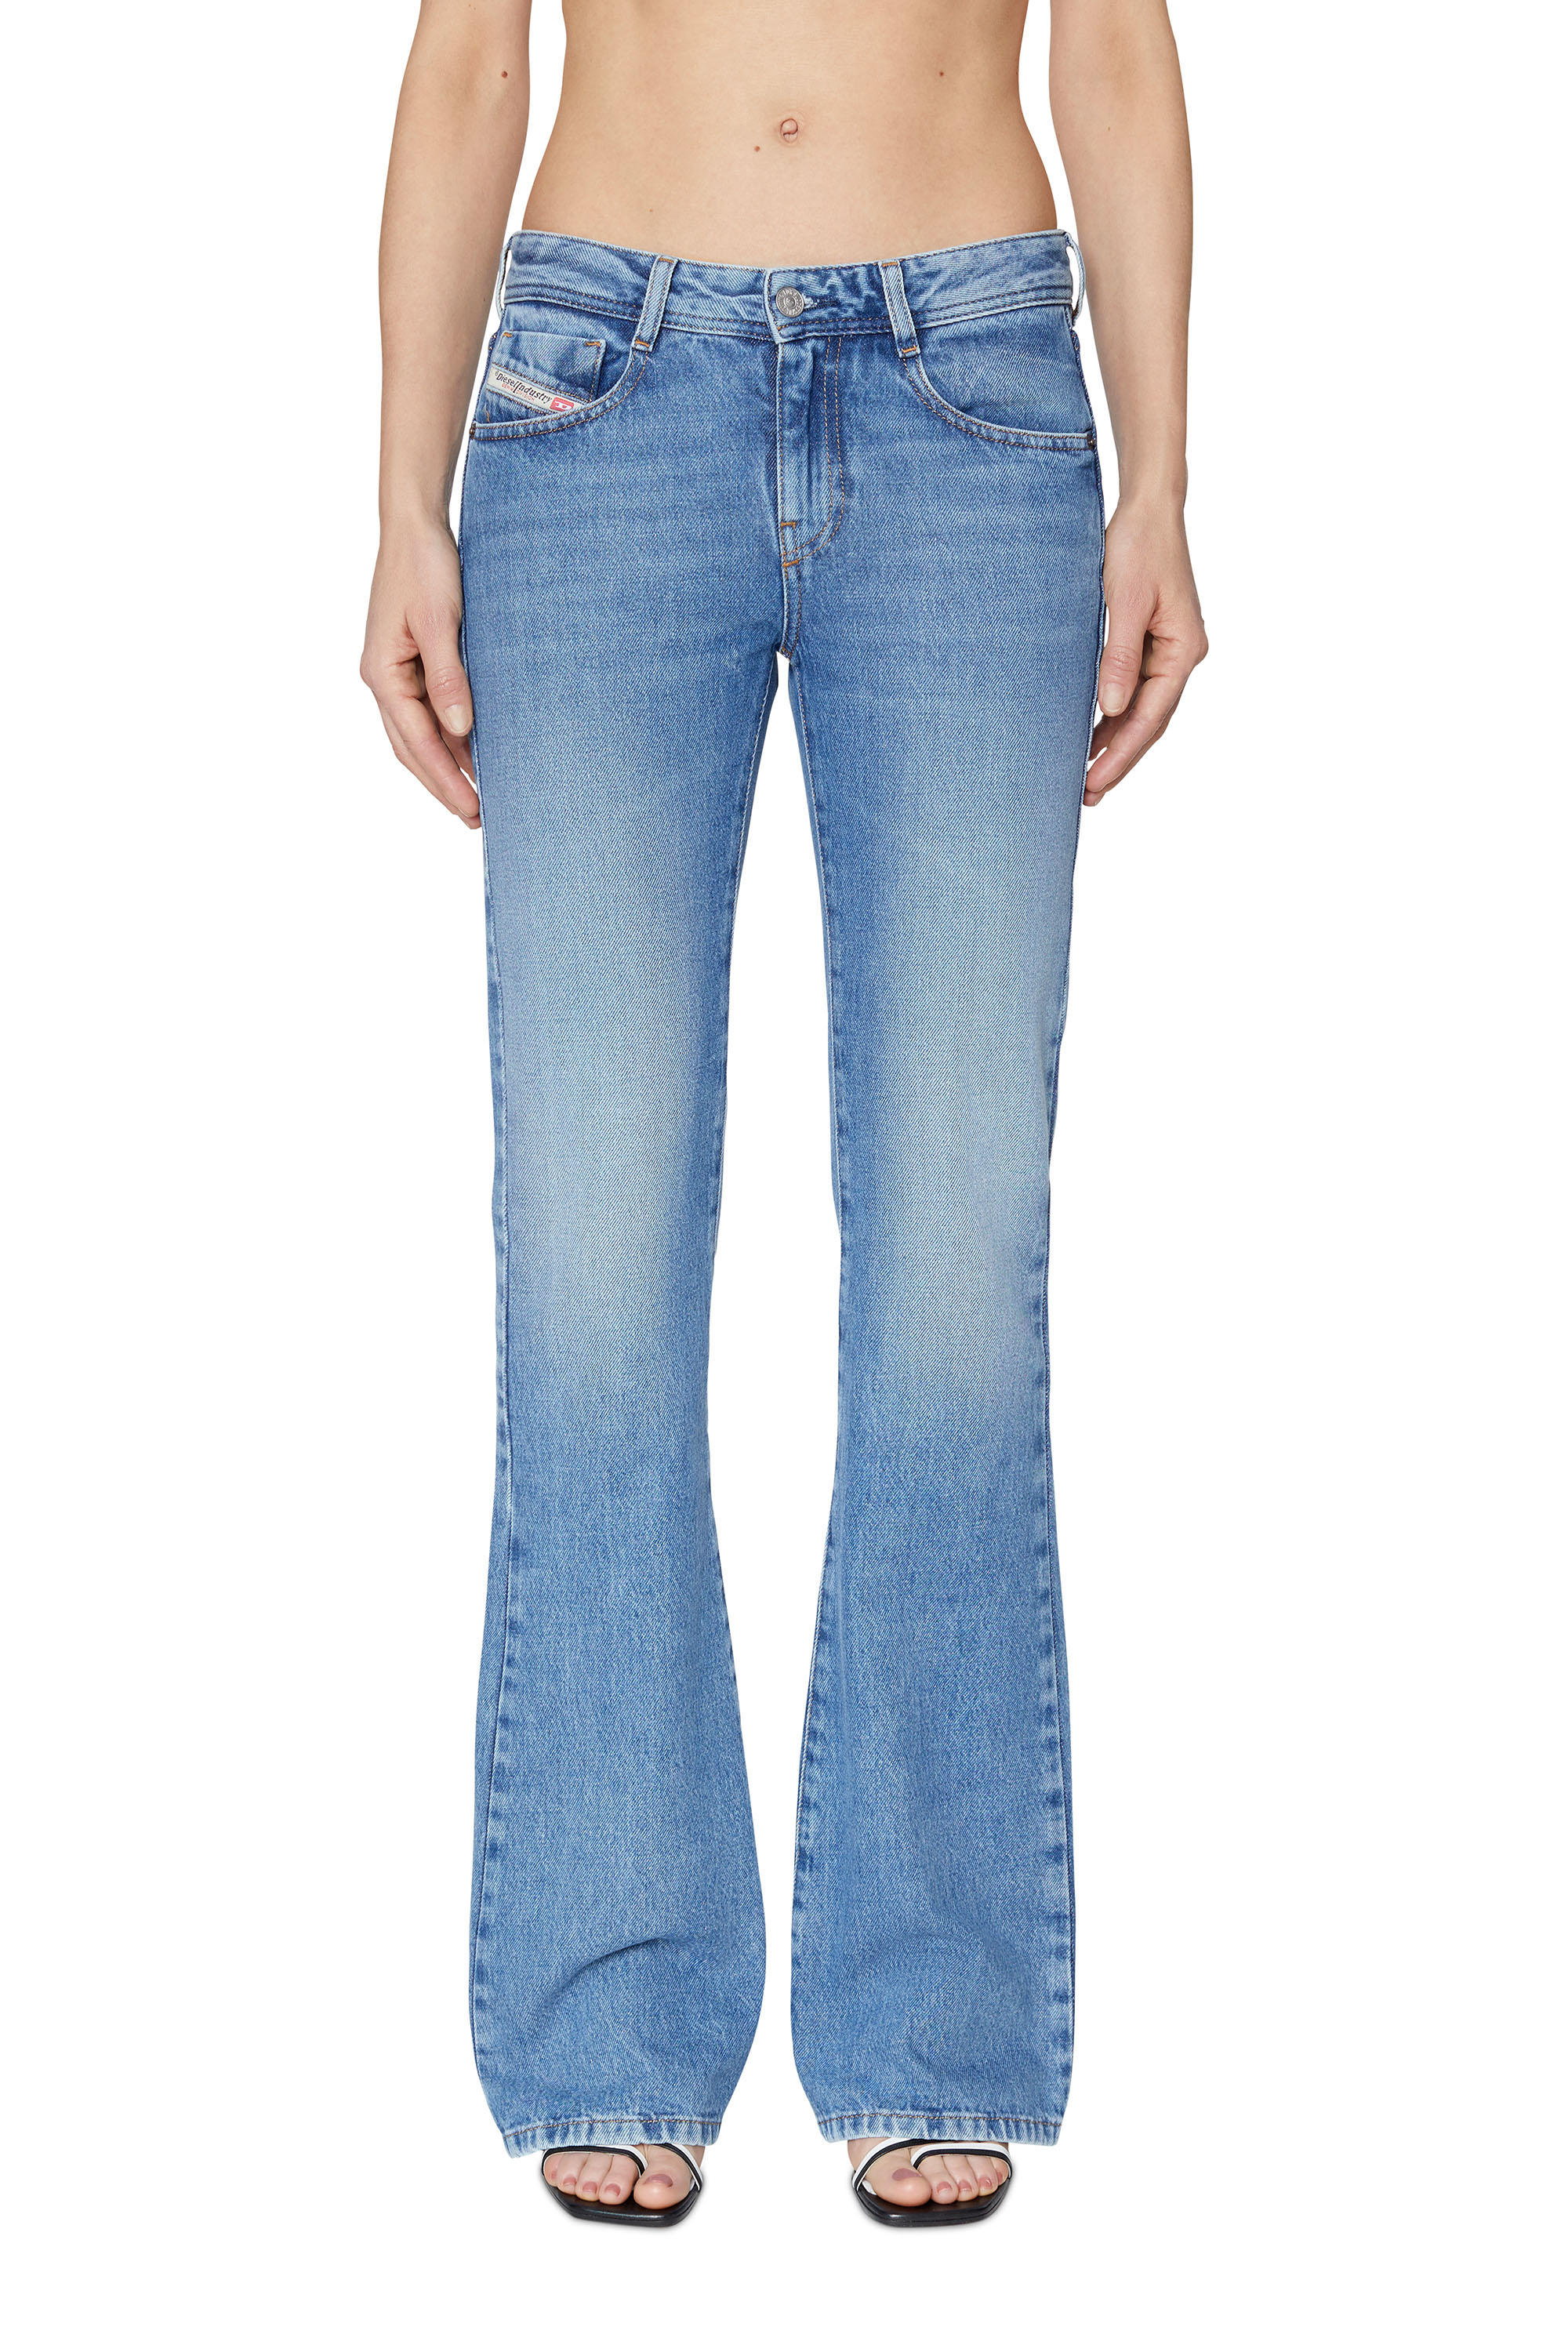 Diesel Bootcut And Flare Jeans In Blue